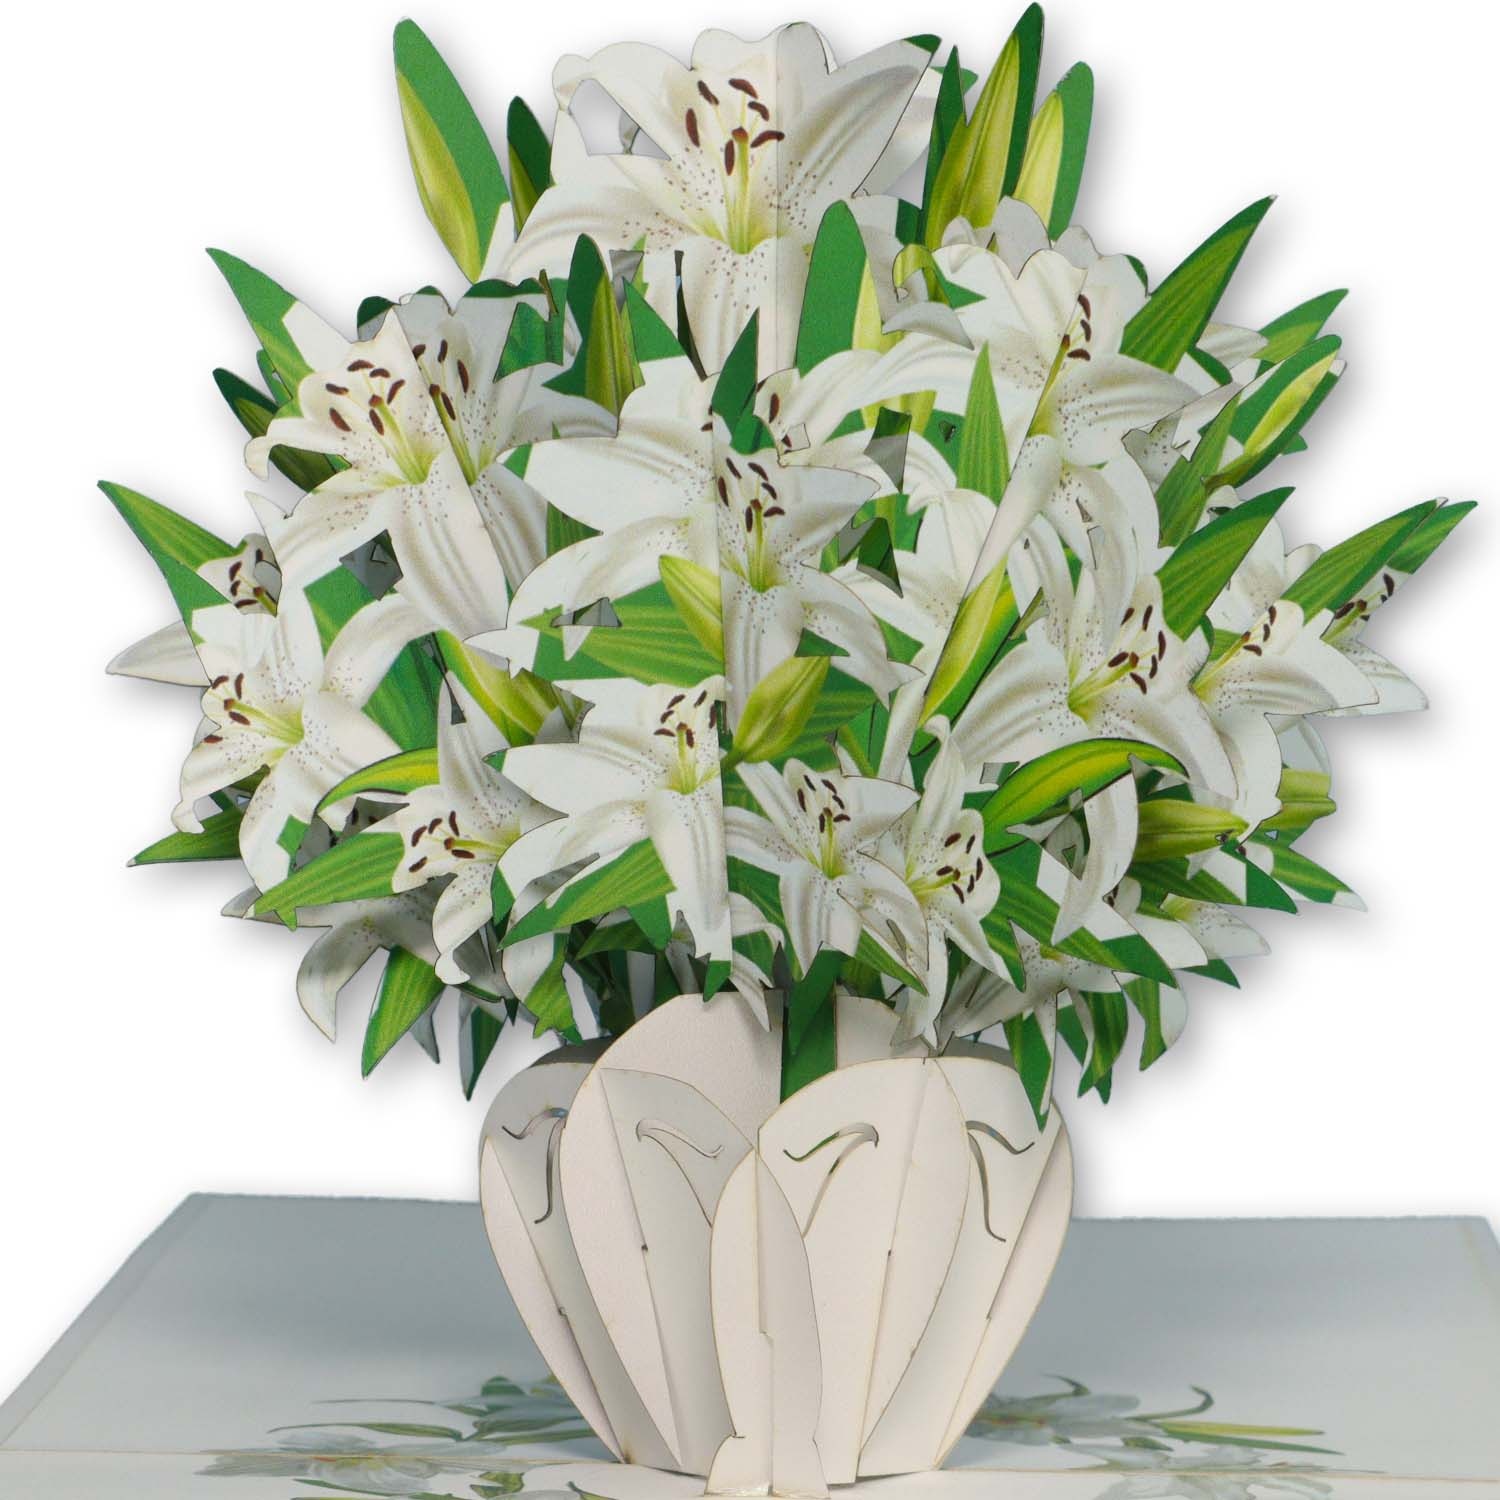 LINPOPUP Pop Up Card Flowers, Bouquet Pop-Up, Greeting Cards, Folded Card, Mother's Day Card, Thank You, Get Well, Farewell, Birthday Card, Pop Up Cards White Lilies, LIN17760, LINPopUp®, N500